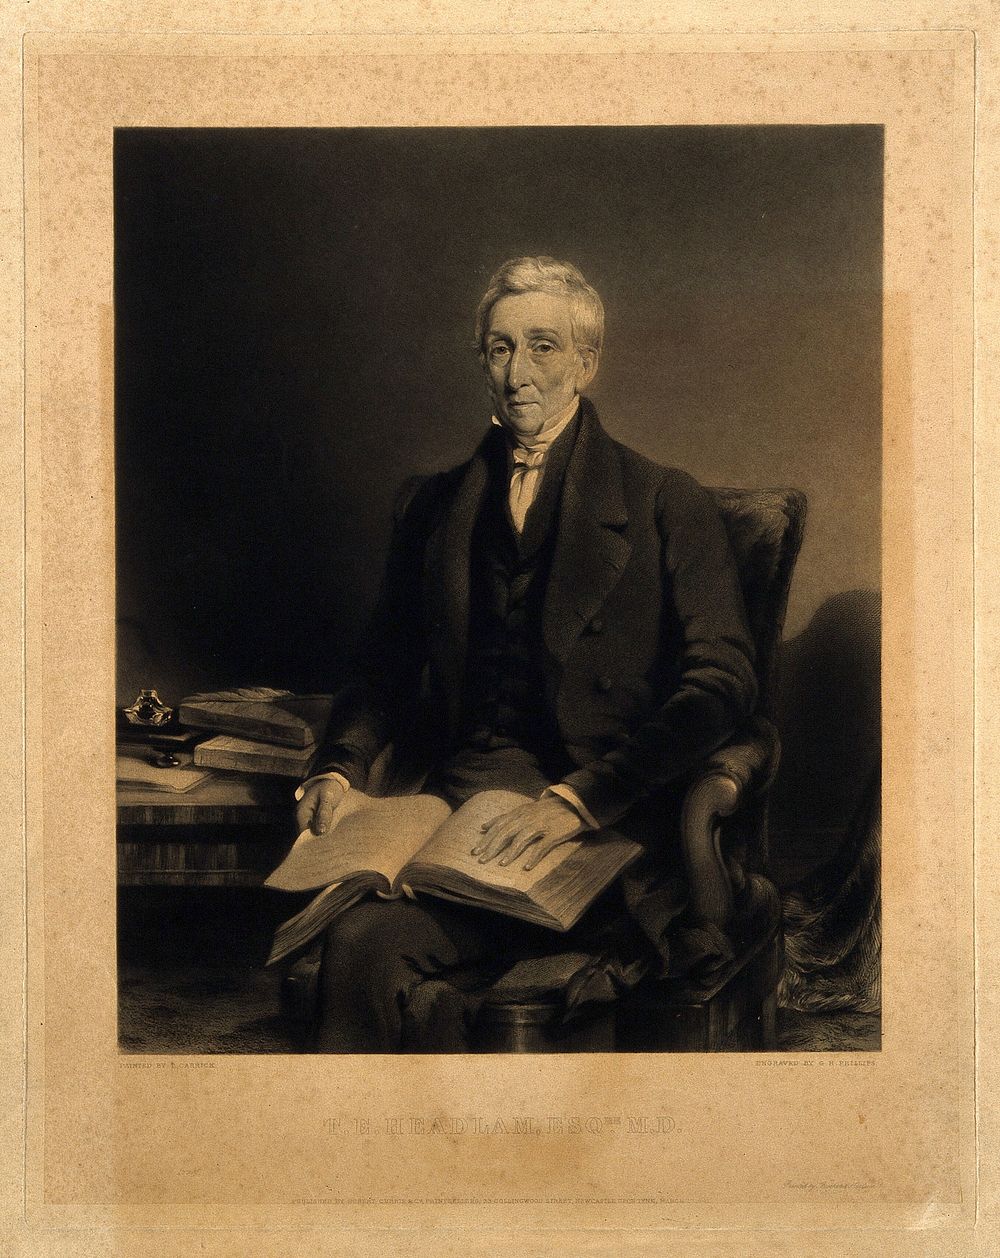 Thomas Emerson Headlam. Mezzotint by G. H. Phillips after T. Carrick.